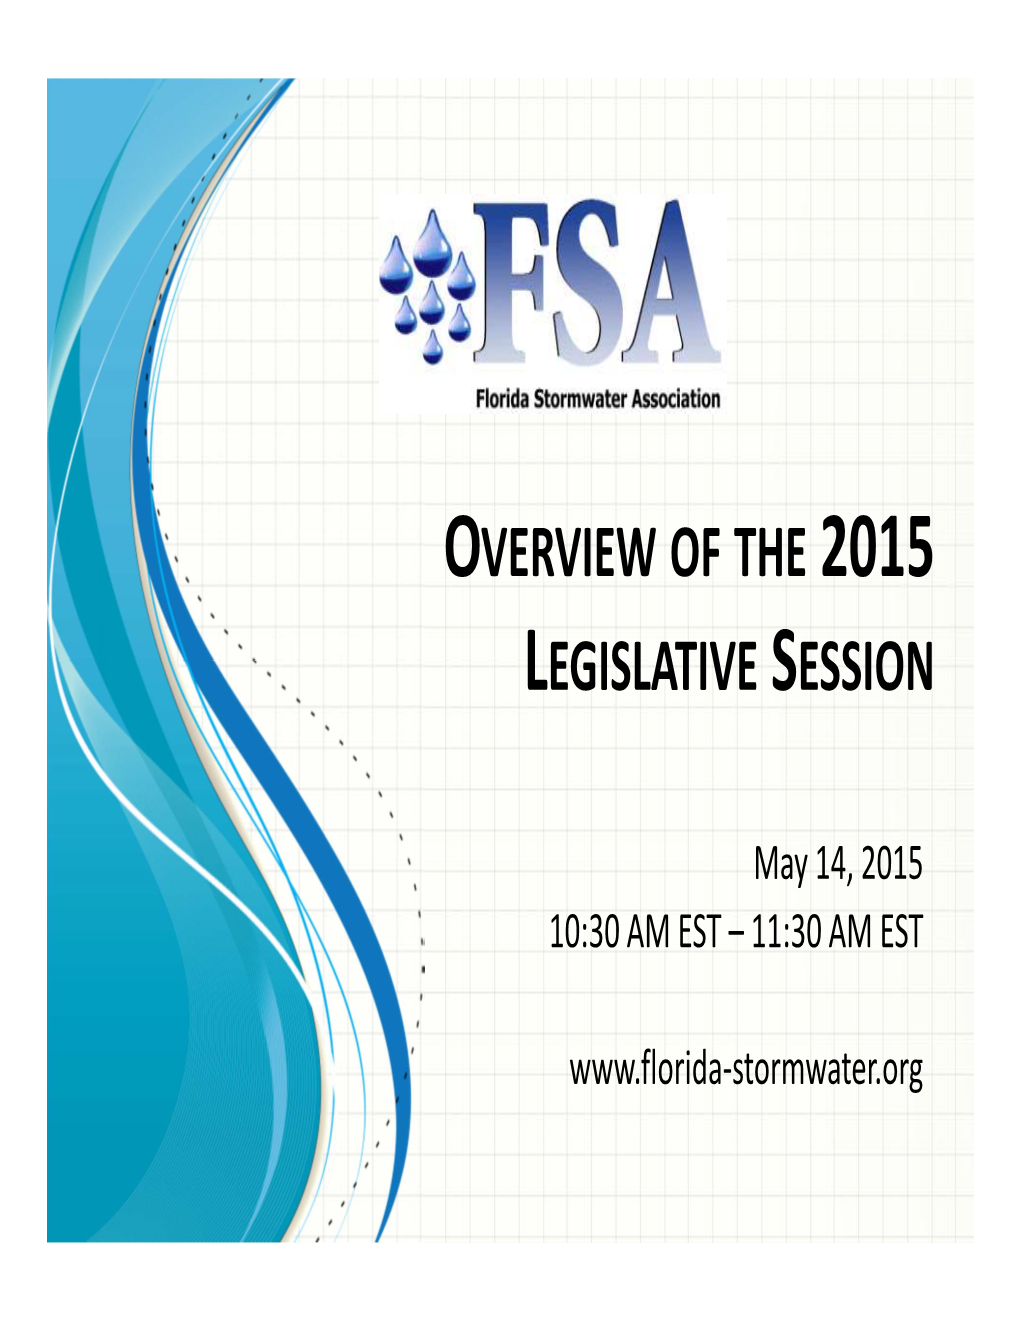 Overview of the 2015 Legislative Session